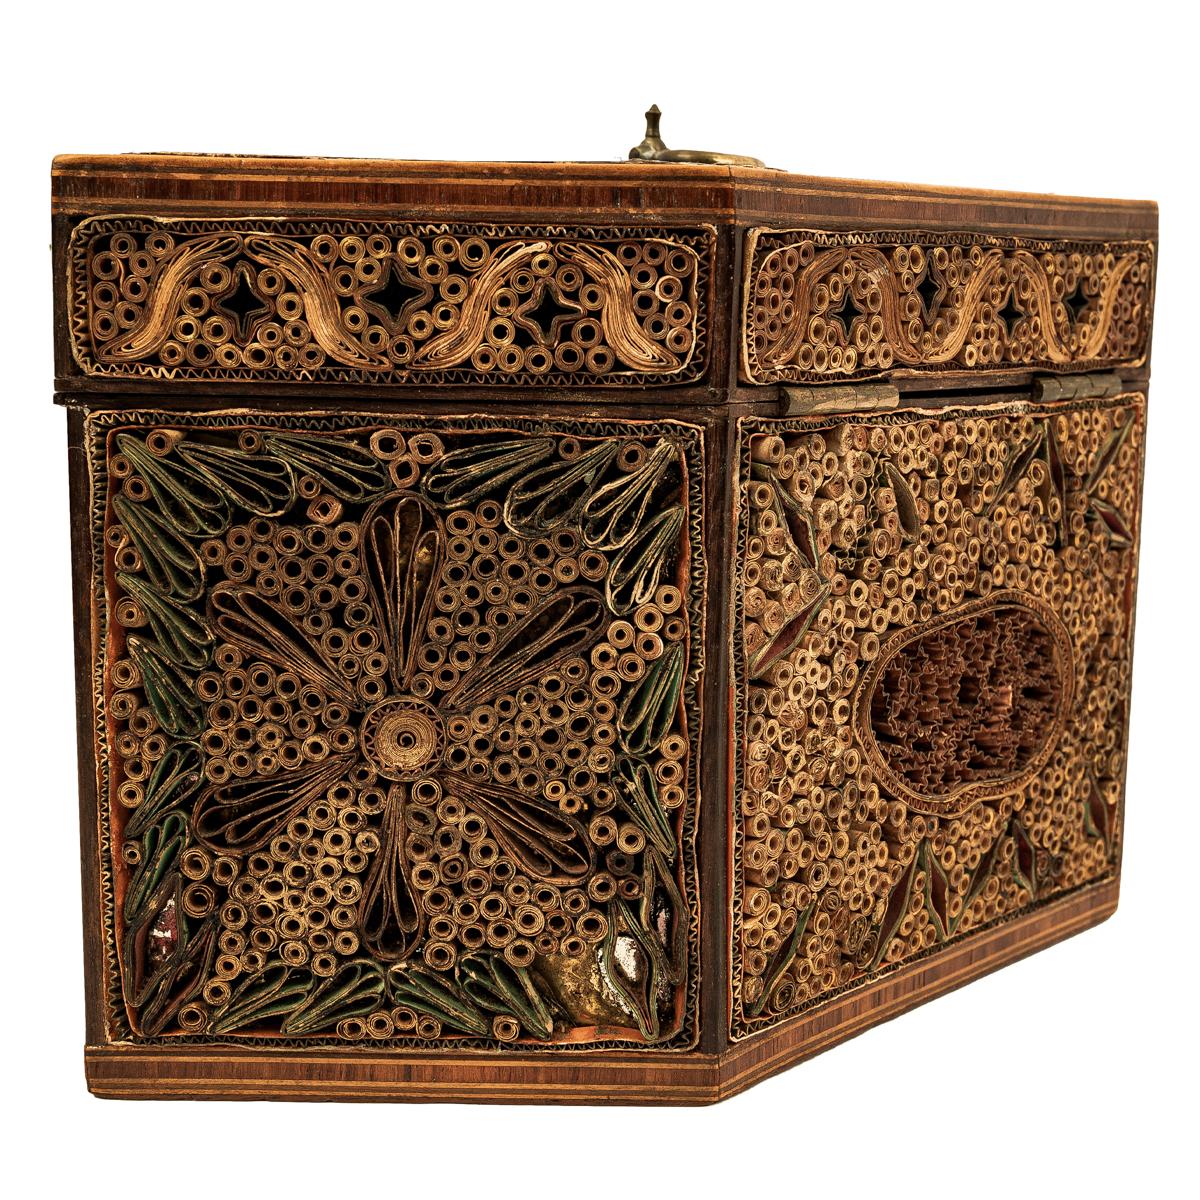 Ivory Antique 18th Century Georgian Mahoghany Paper Scroll Work Tea Caddy Box 1780 For Sale